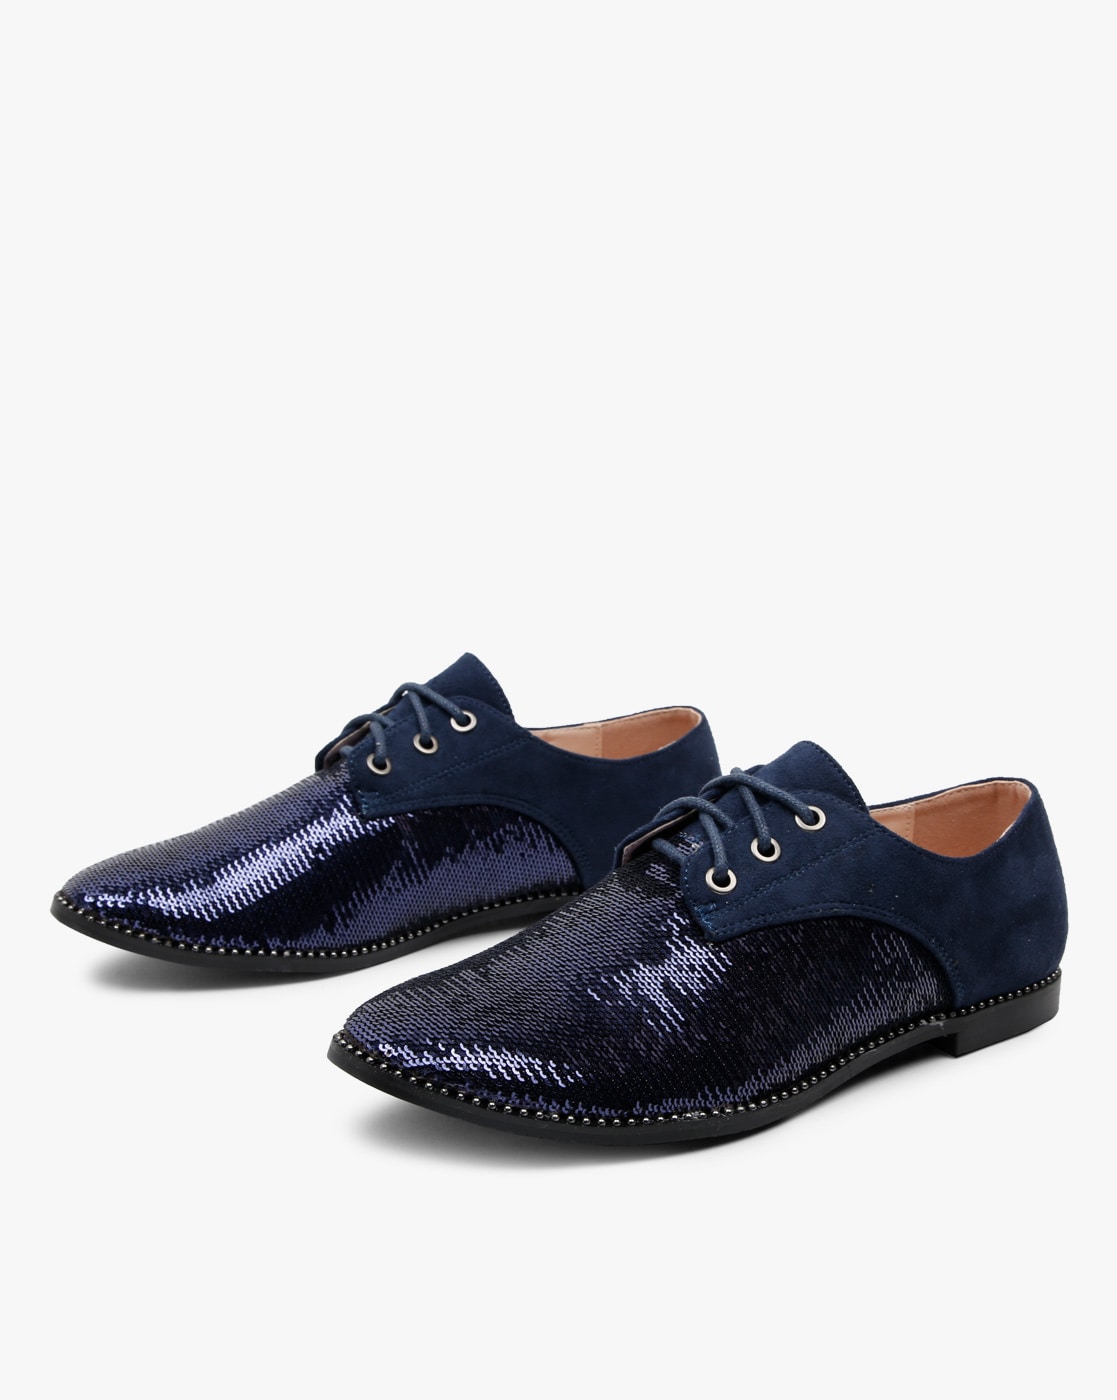 navy blue oxford shoes womens